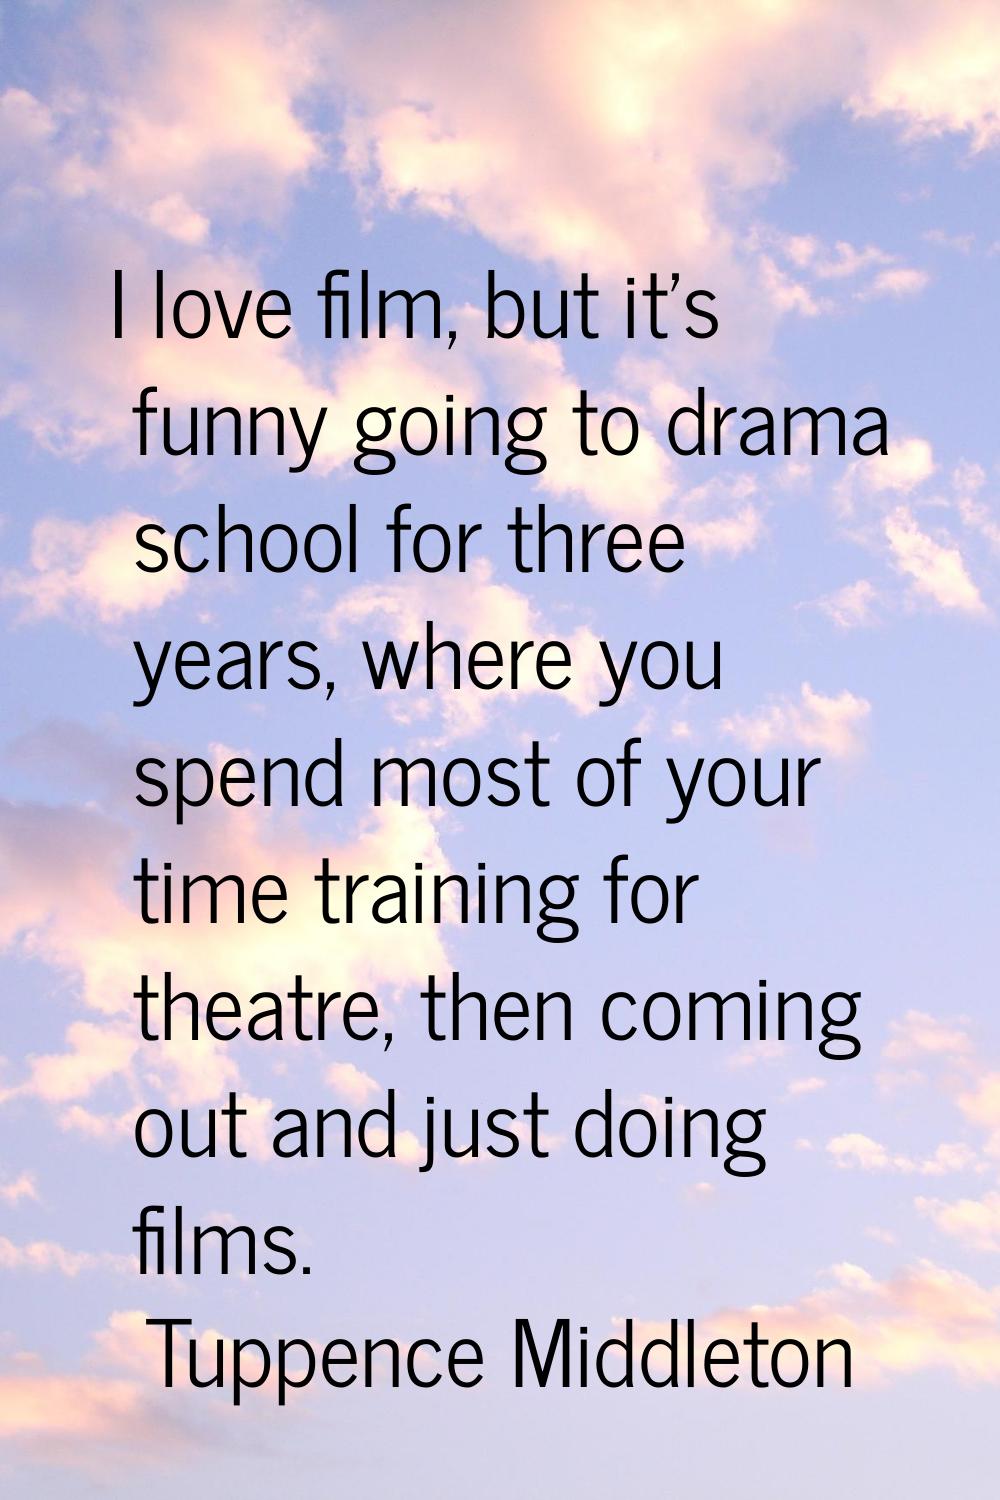 I love film, but it's funny going to drama school for three years, where you spend most of your tim